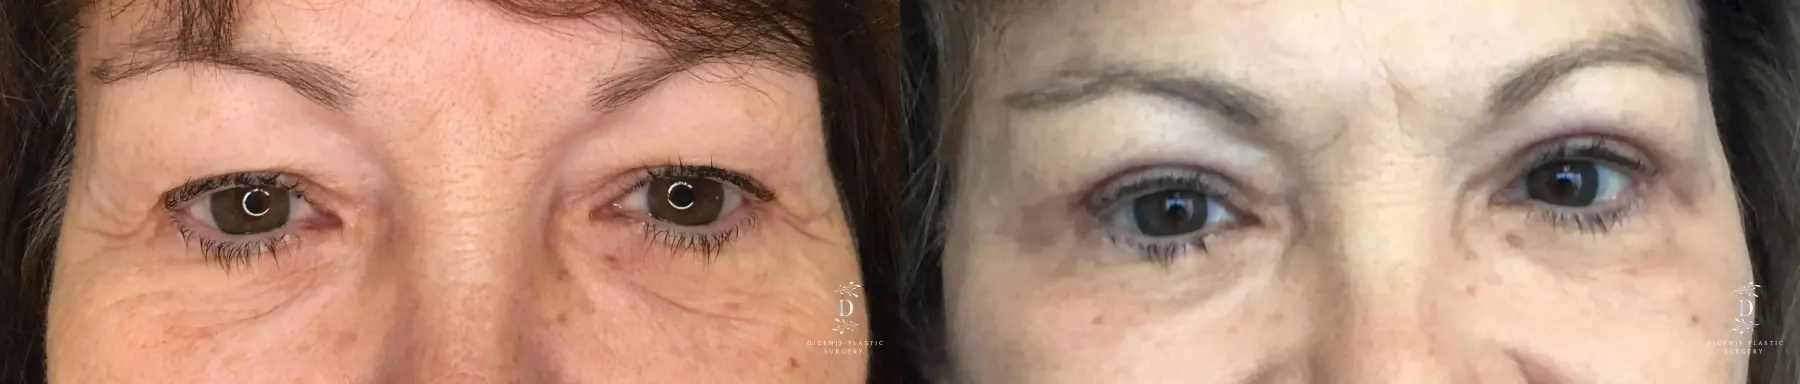 Eyelid Surgery: Patient 20 - Before and After 1